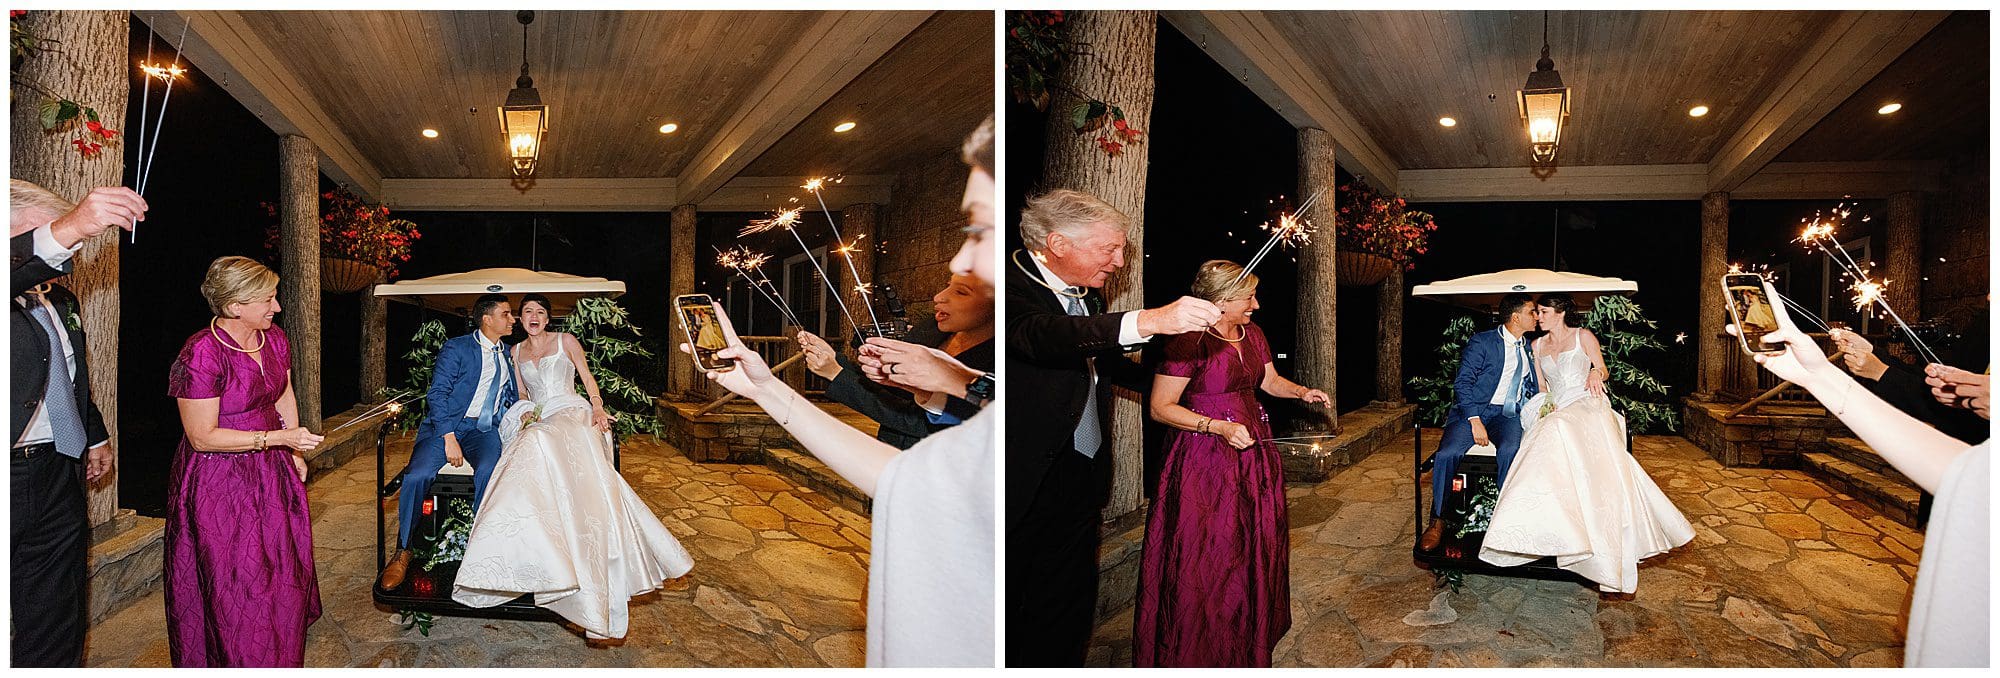 A bride and groom are holding sparklers as they walk down the aisle.